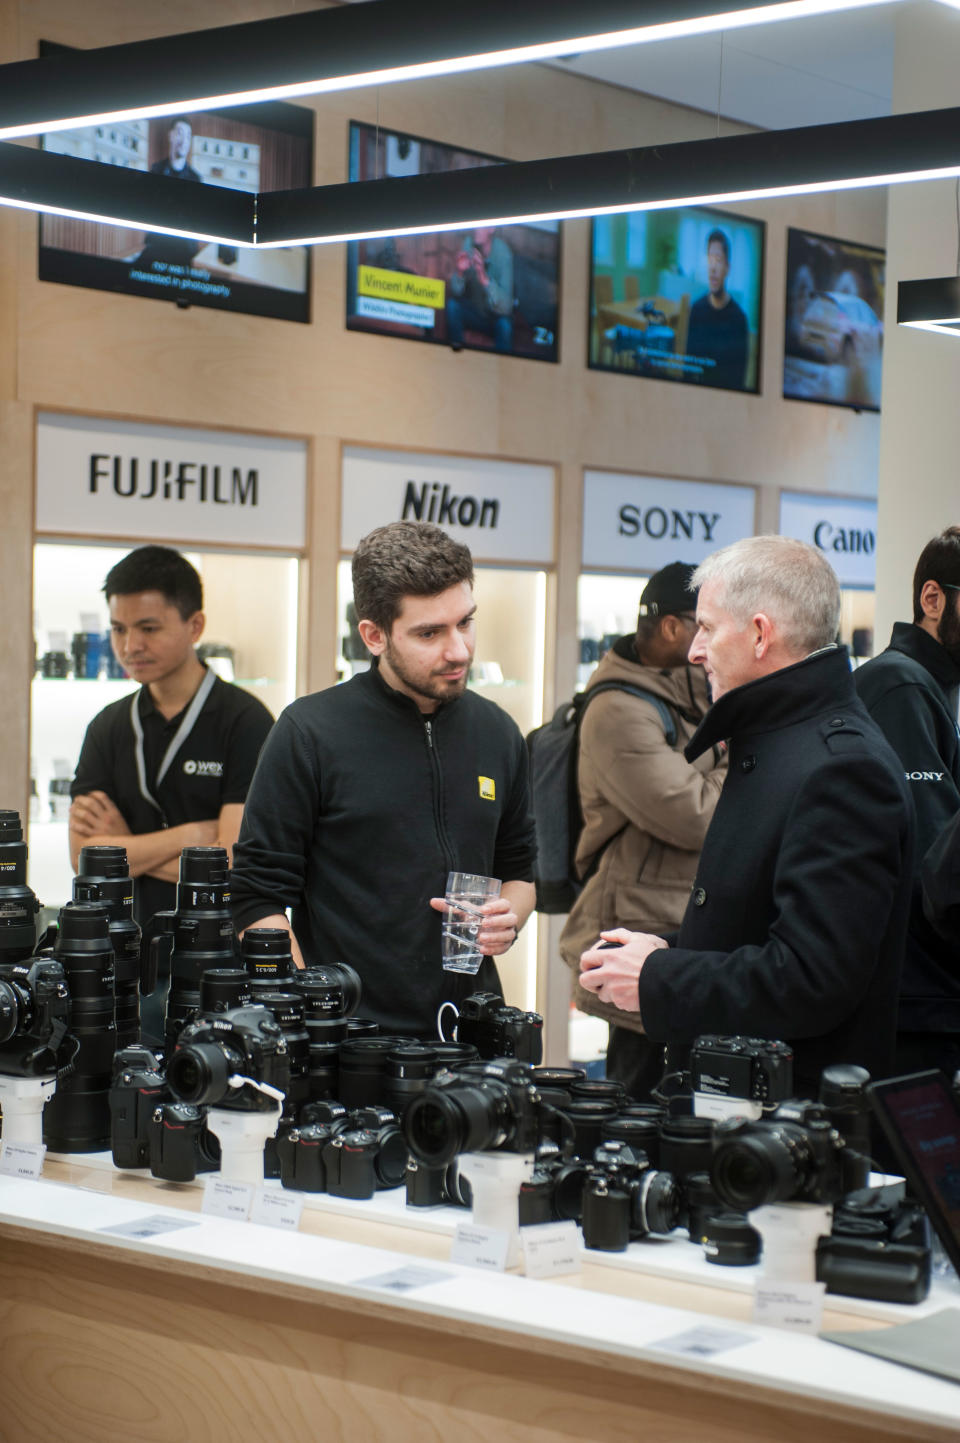 Photo showing staff member at Wex Photo Video Putney discussing Nikon camera equipment